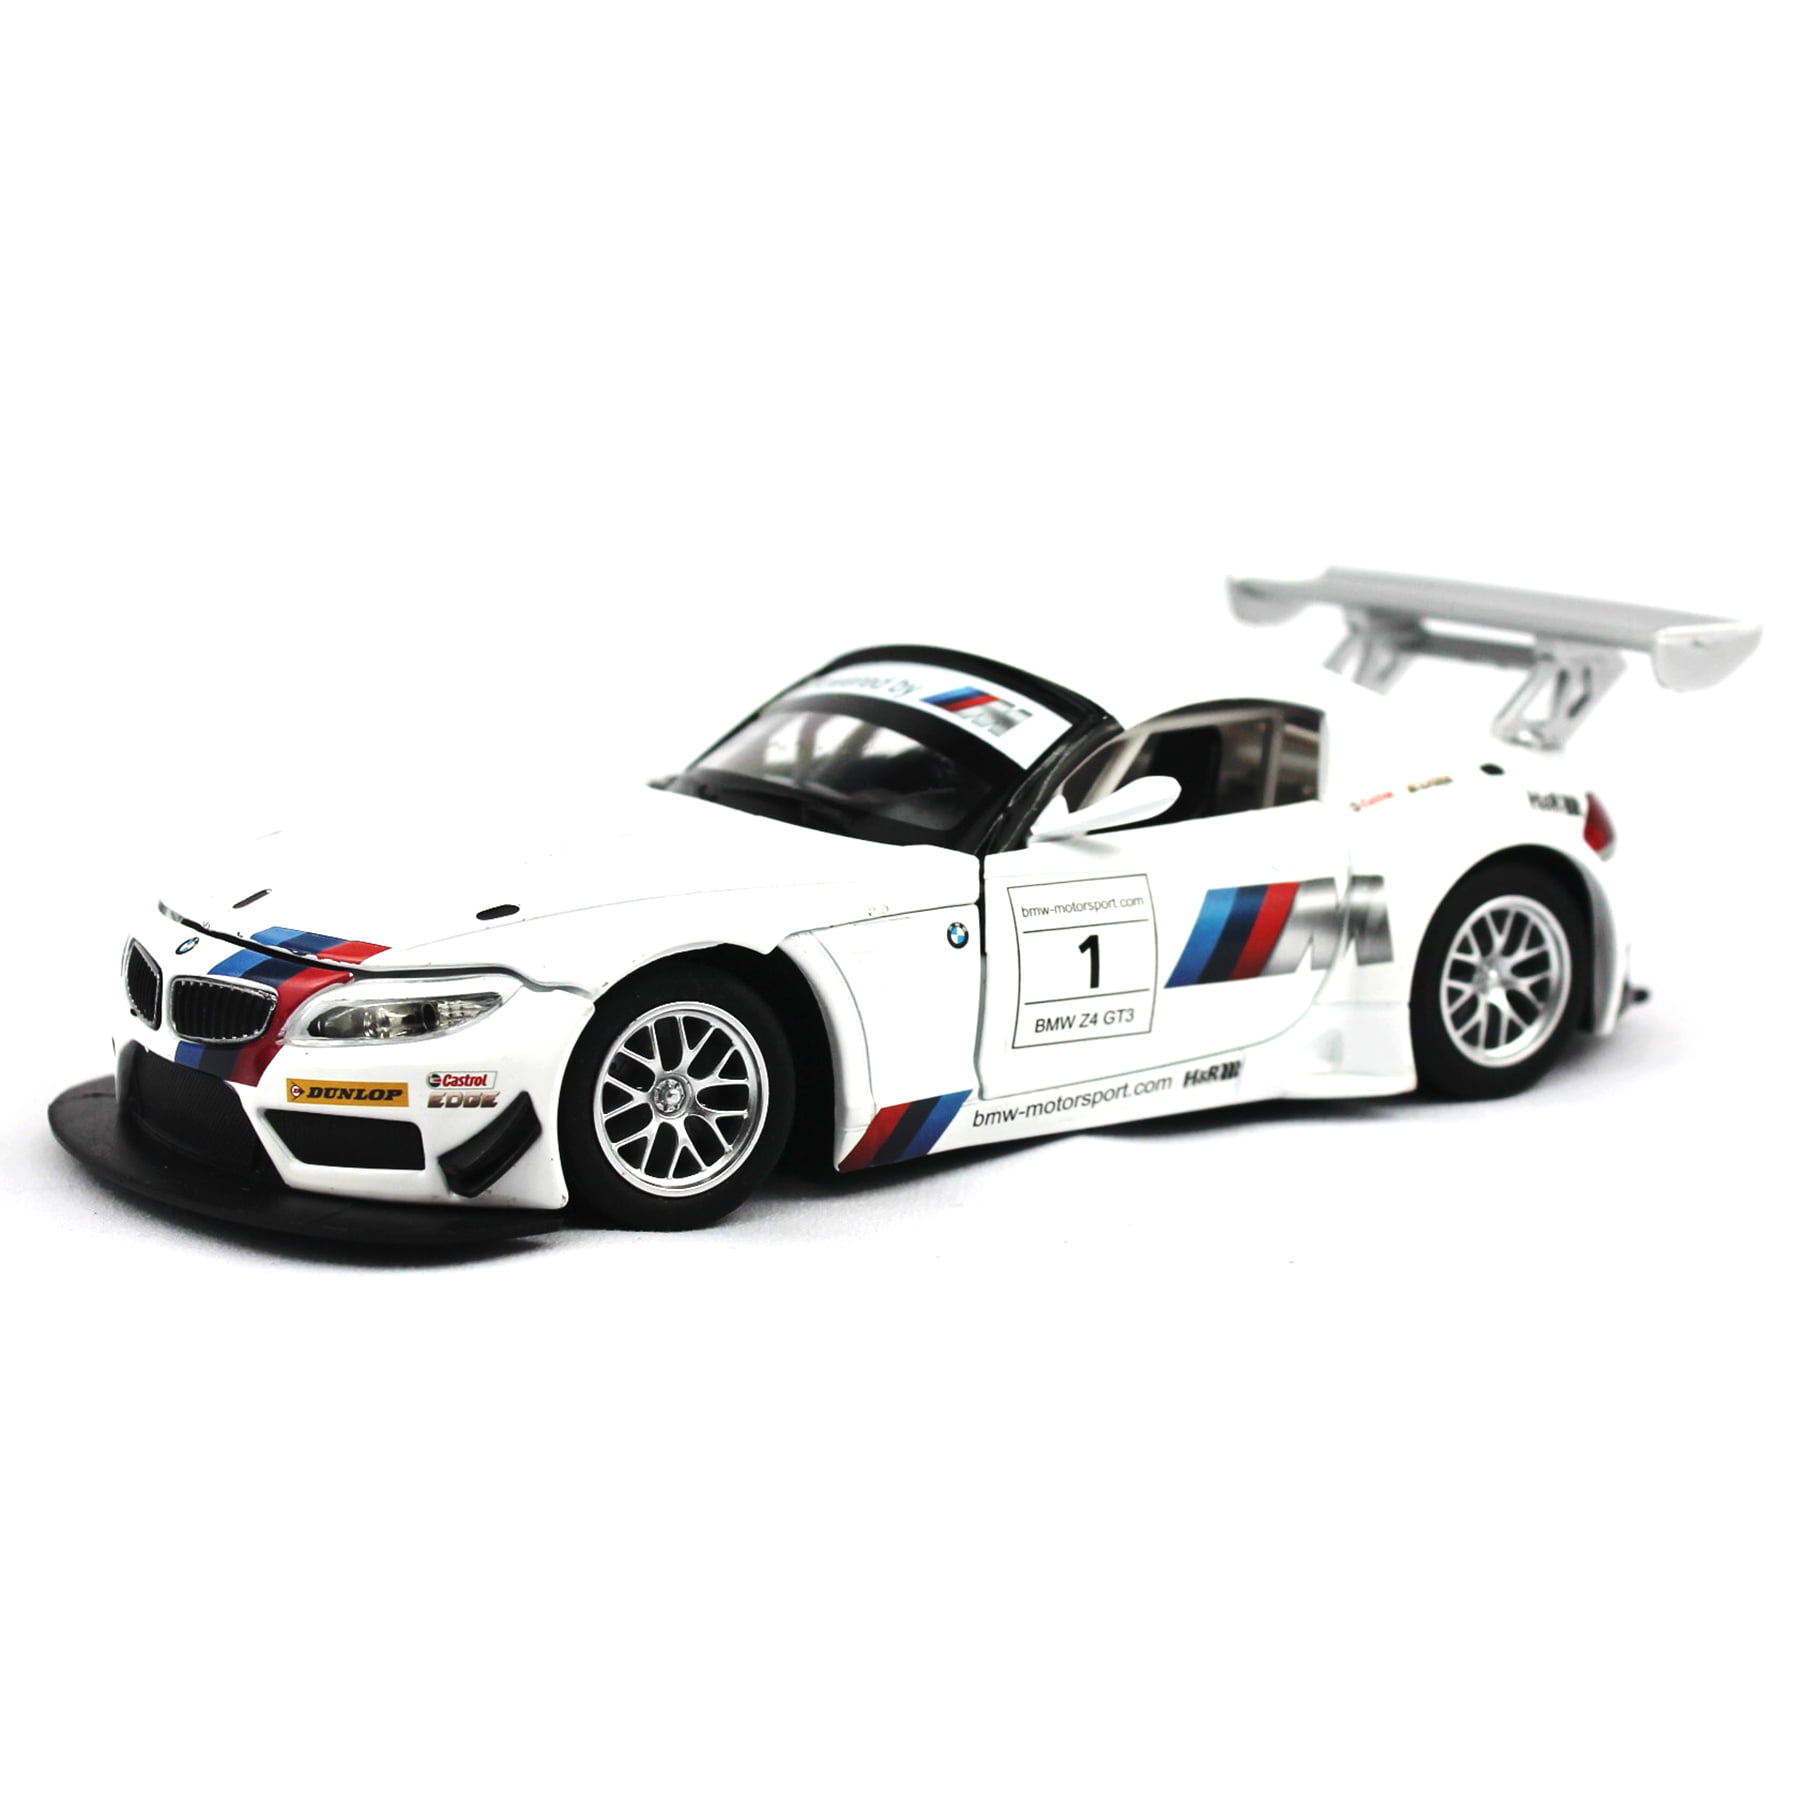 1:32 BMW Z4 GT3 Scale Model Car Diecast Toy Vehicle Collection Kids Gift Black